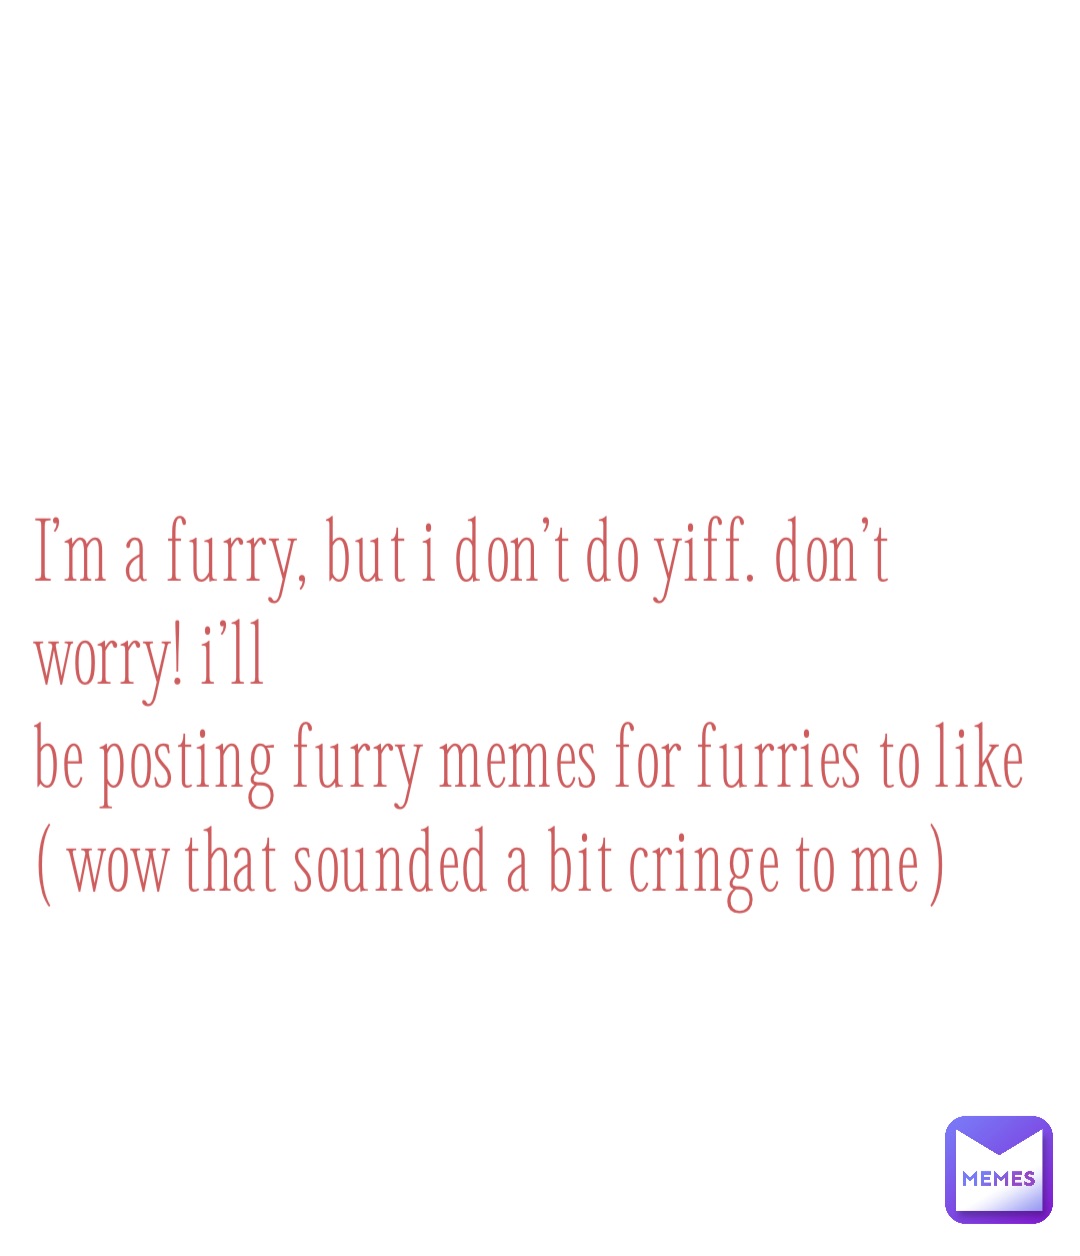 I’m a furry, but I don’t do yiff. Don’t worry! I’ll 
be posting furry memes for furries to like
( wow that sounded a bit cringe to me )